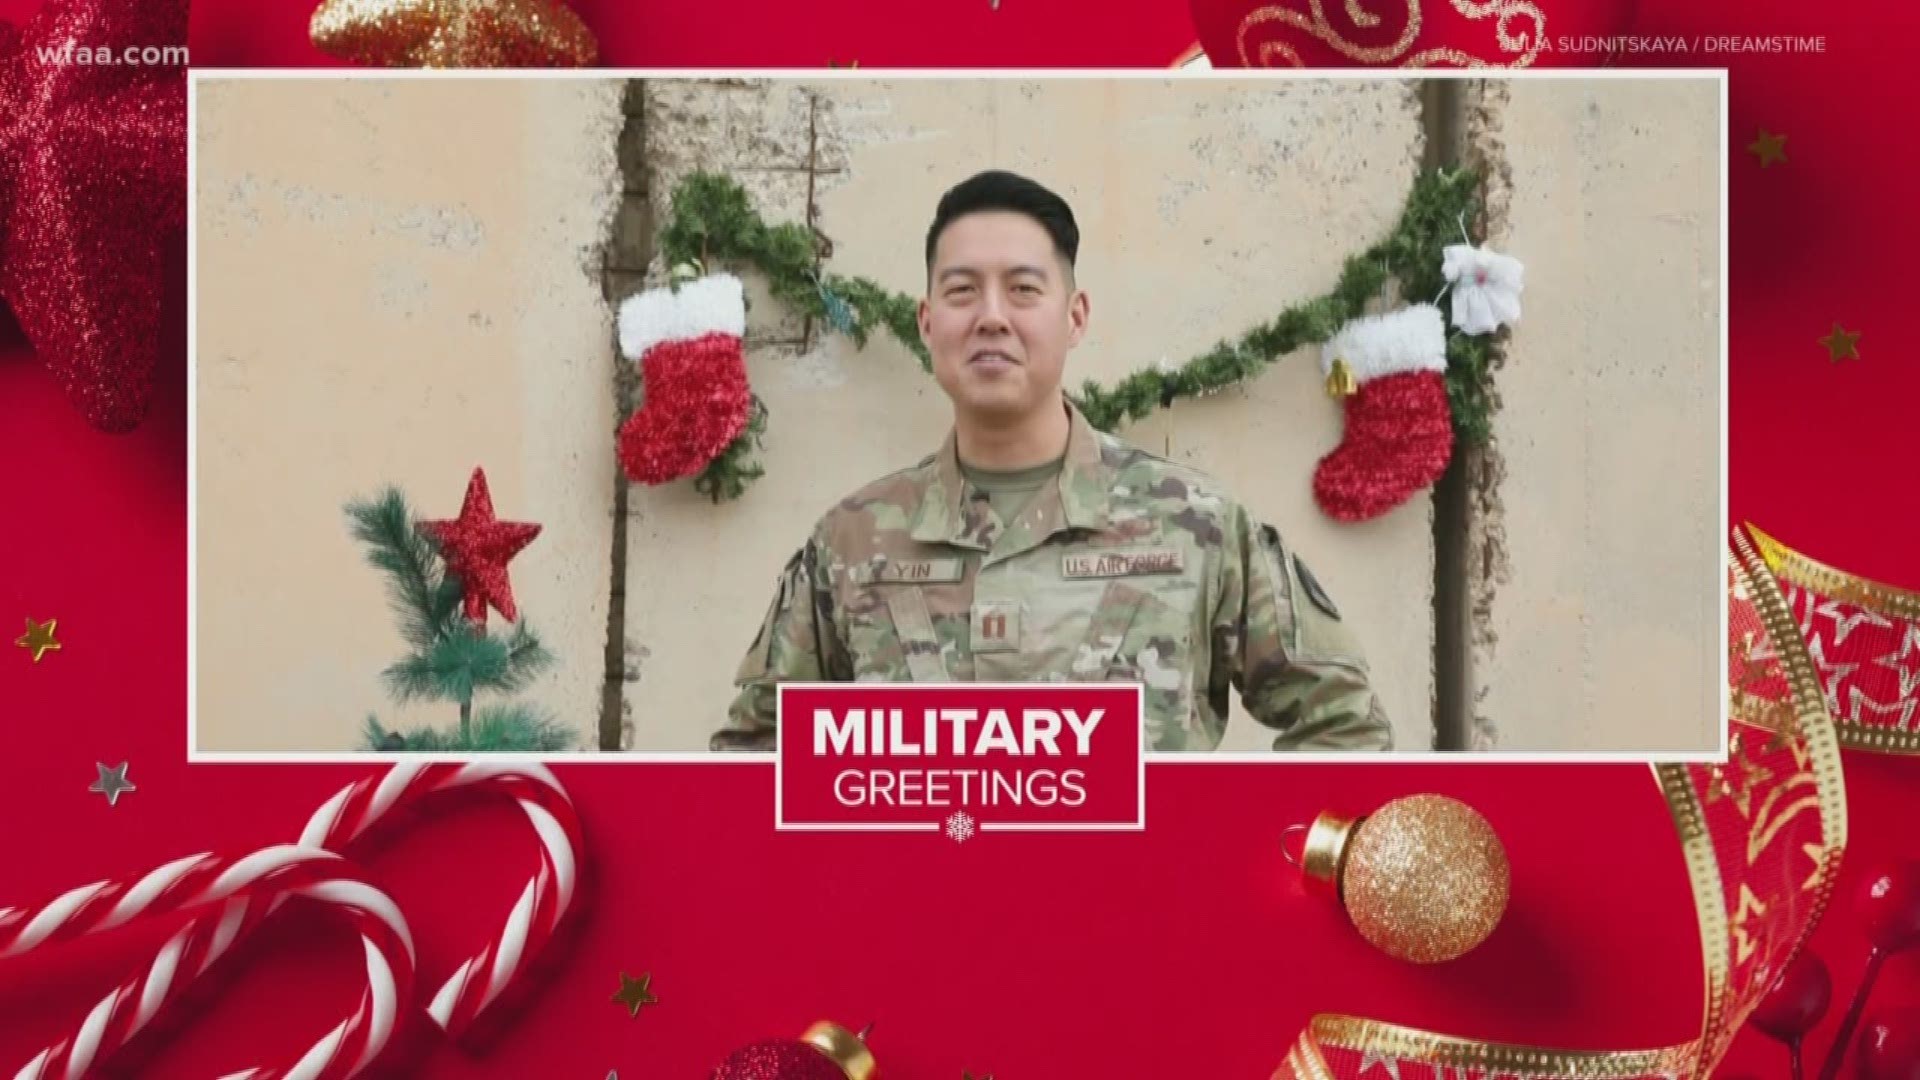 U.S. Air Force Cpt. Albert Yin, of Colleyville, wishes his family a happy holiday from Iraq as he promises to be home soon.